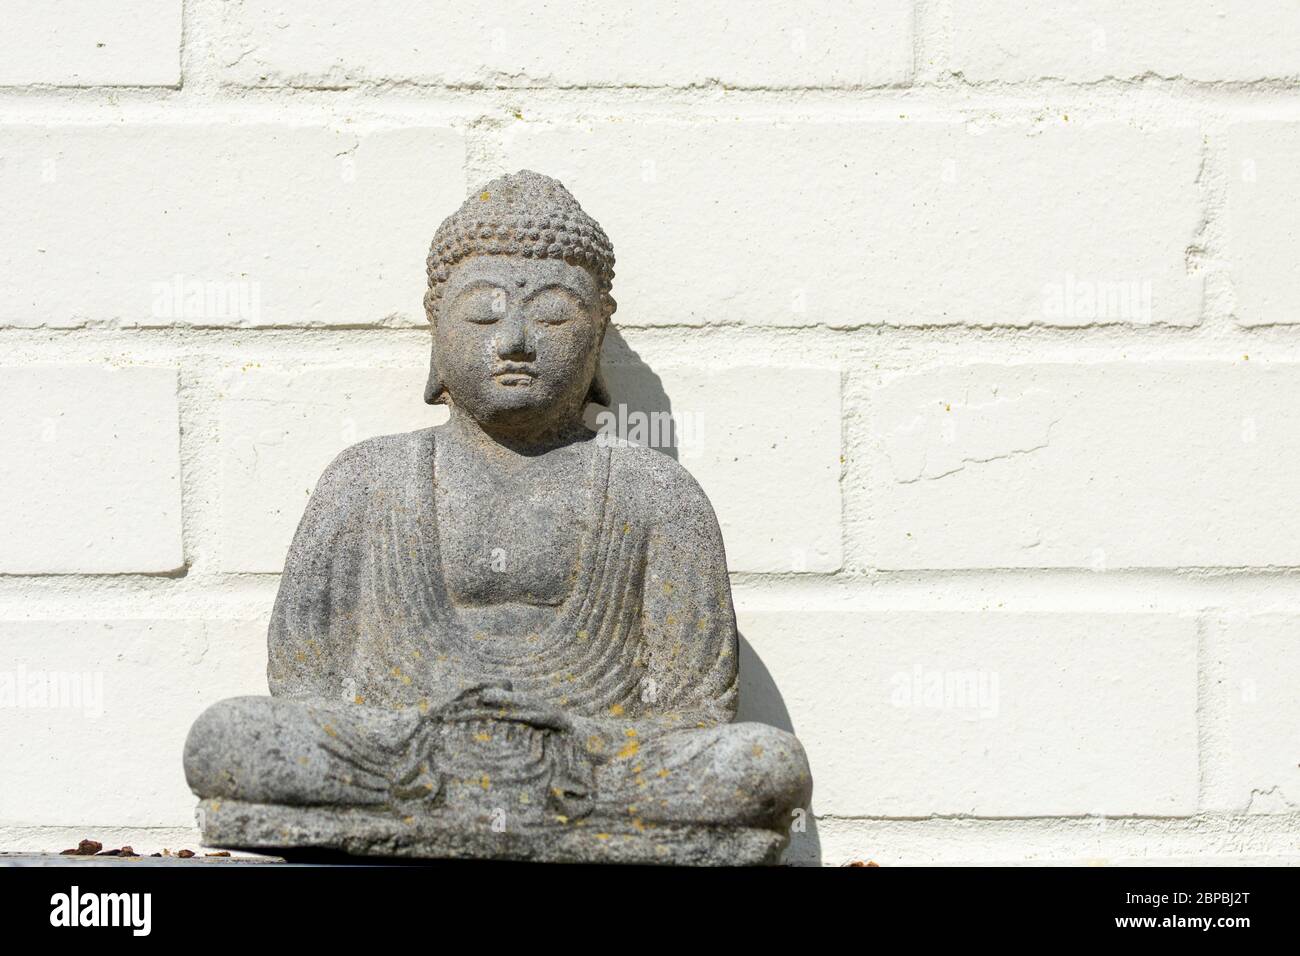 Budha statue sitting in from of white brick wall Stock Photo